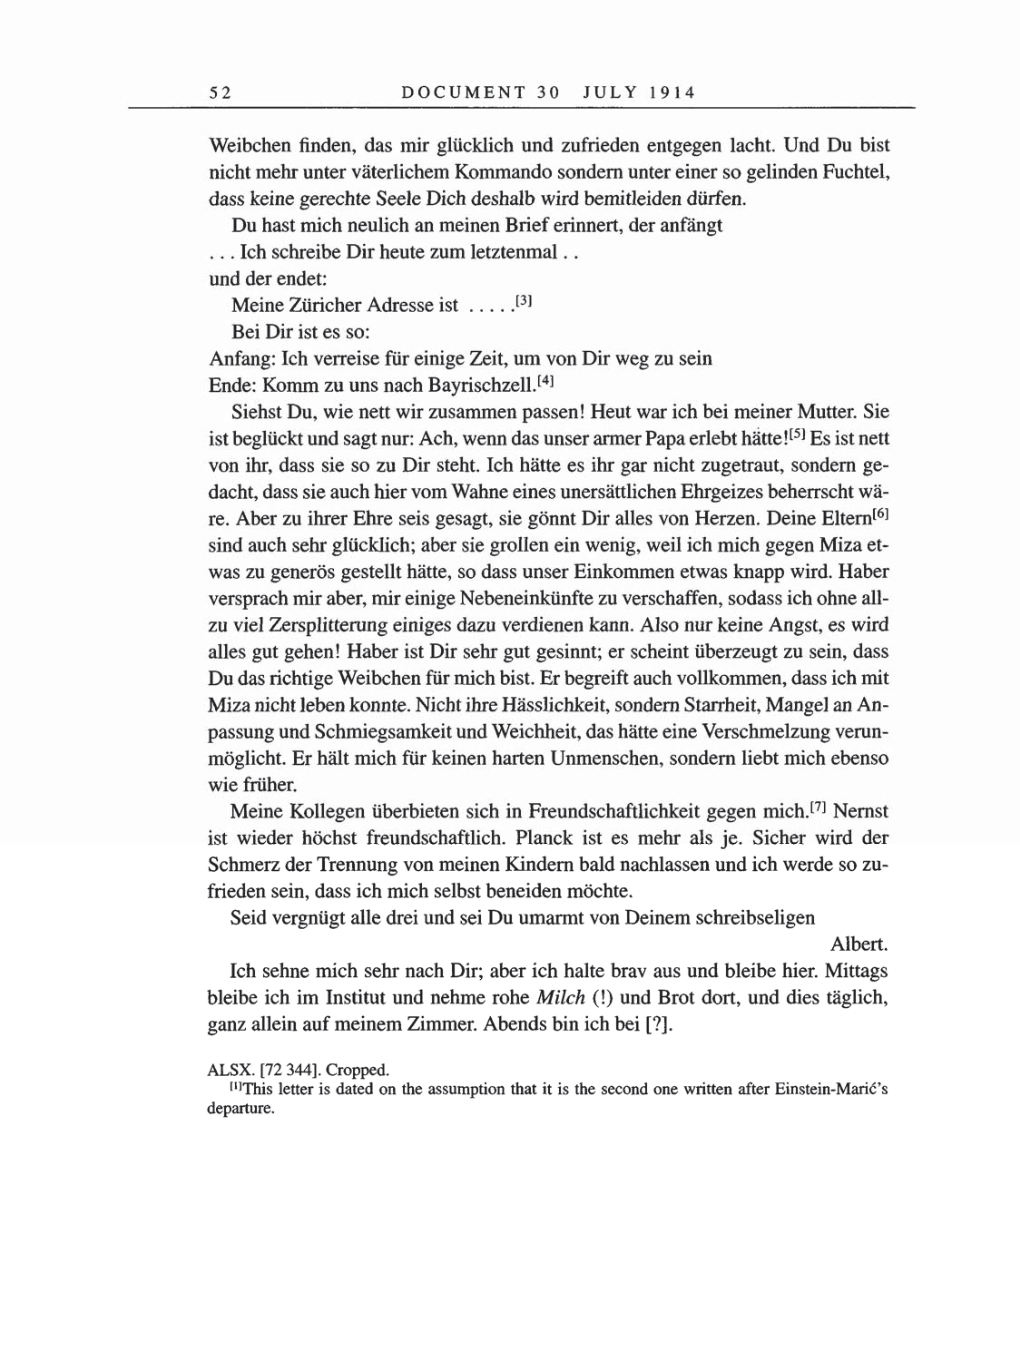 Volume 8, Part A: The Berlin Years: Correspondence 1914-1917 page 52